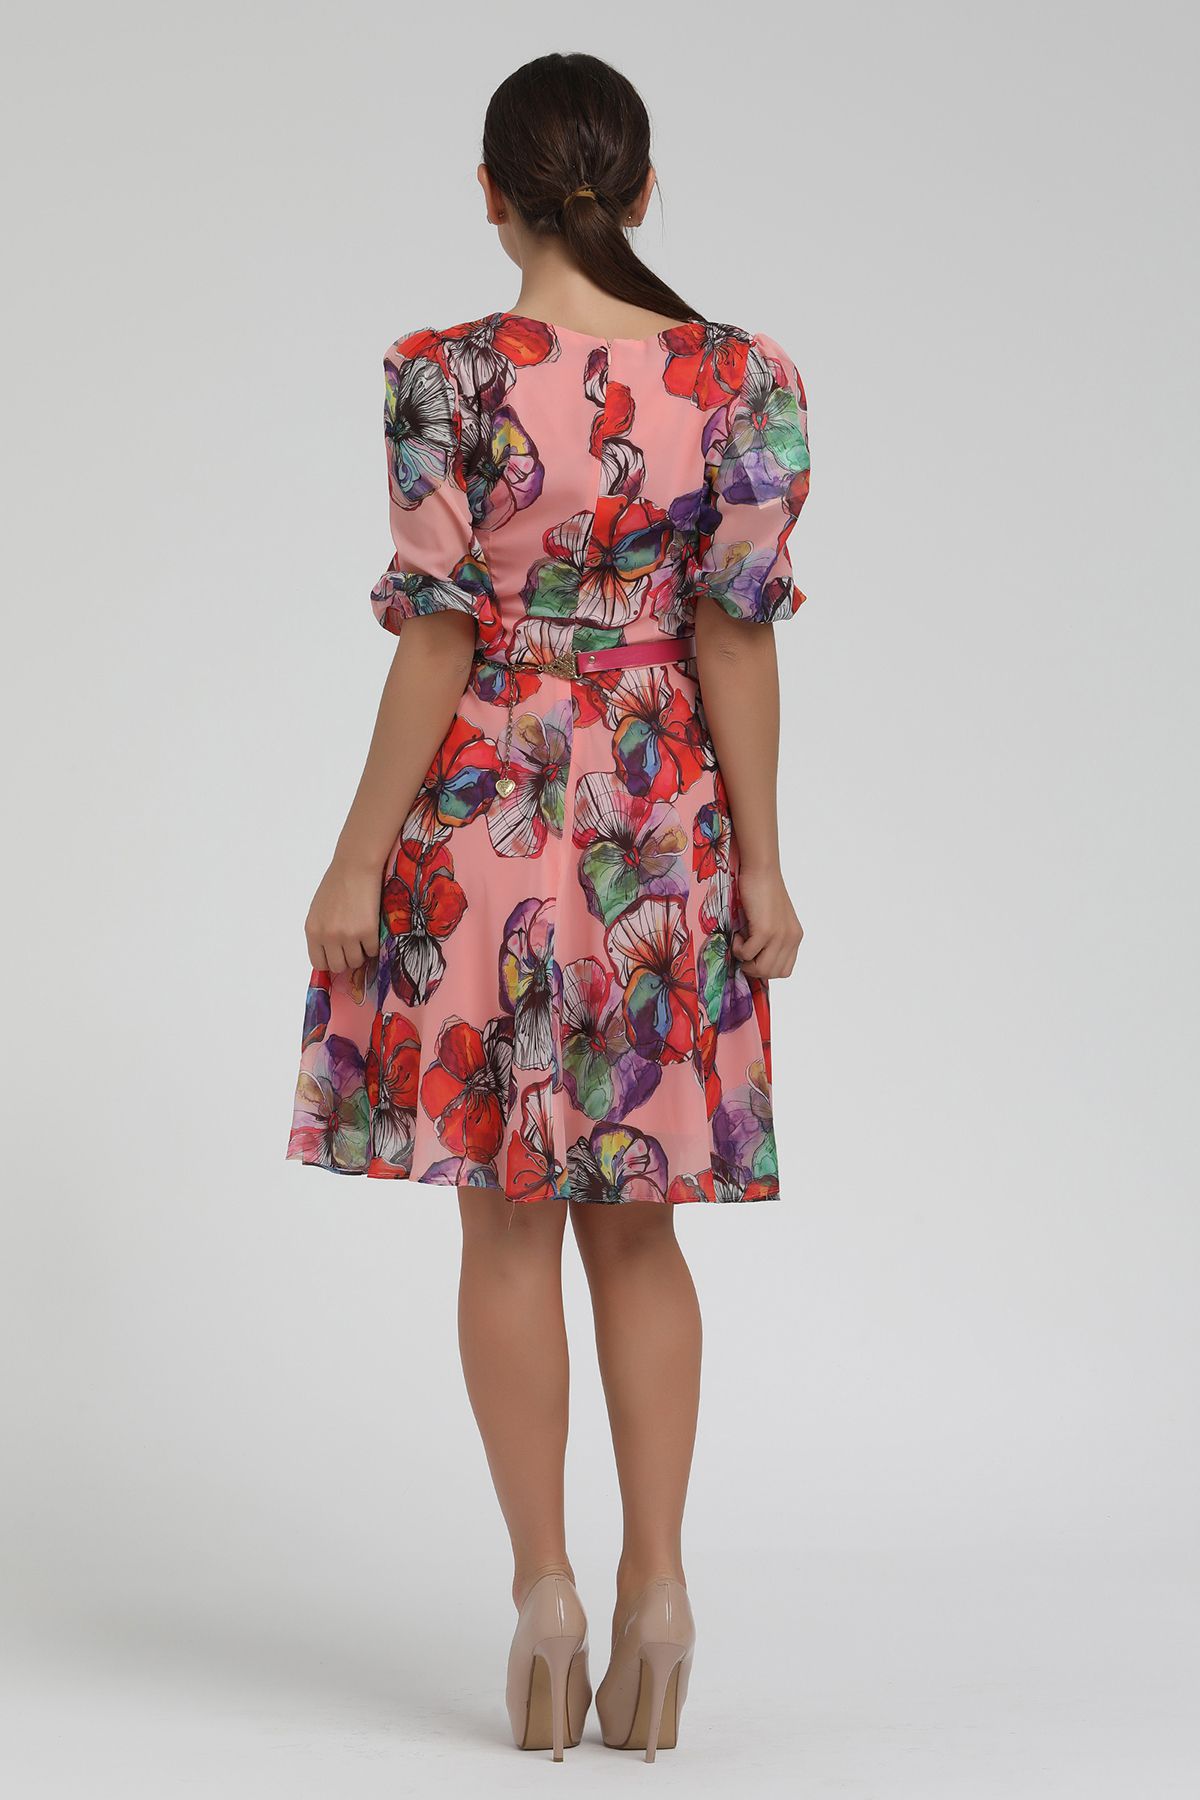 Picture of flower Patterned Chiffon Short Dress